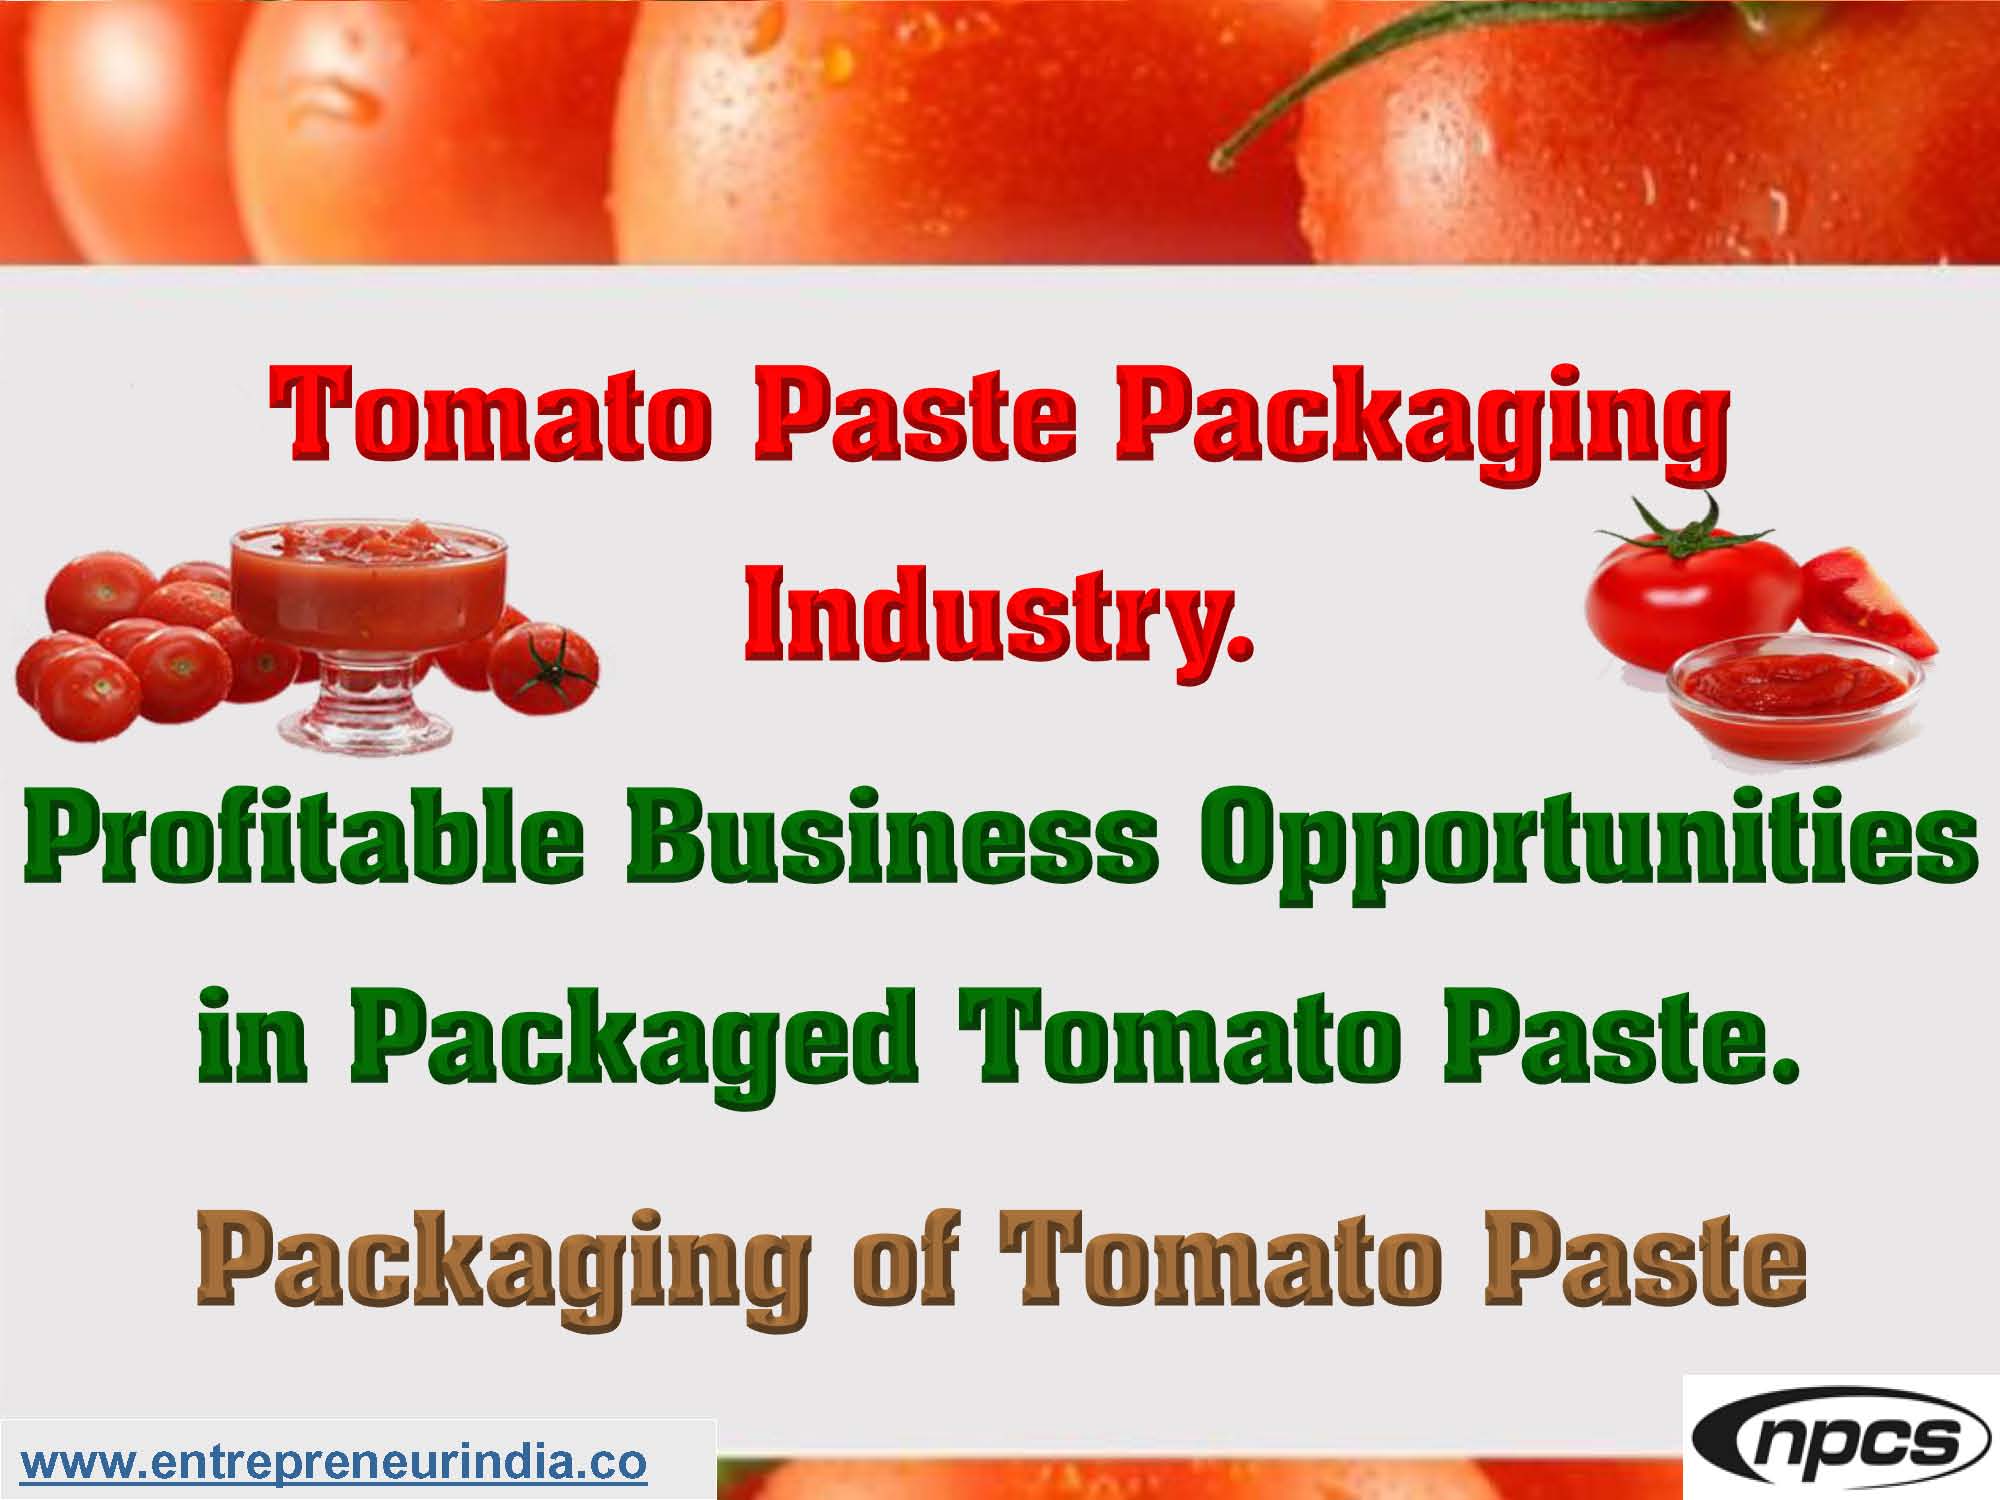 Tomato Paste Packaging Industry